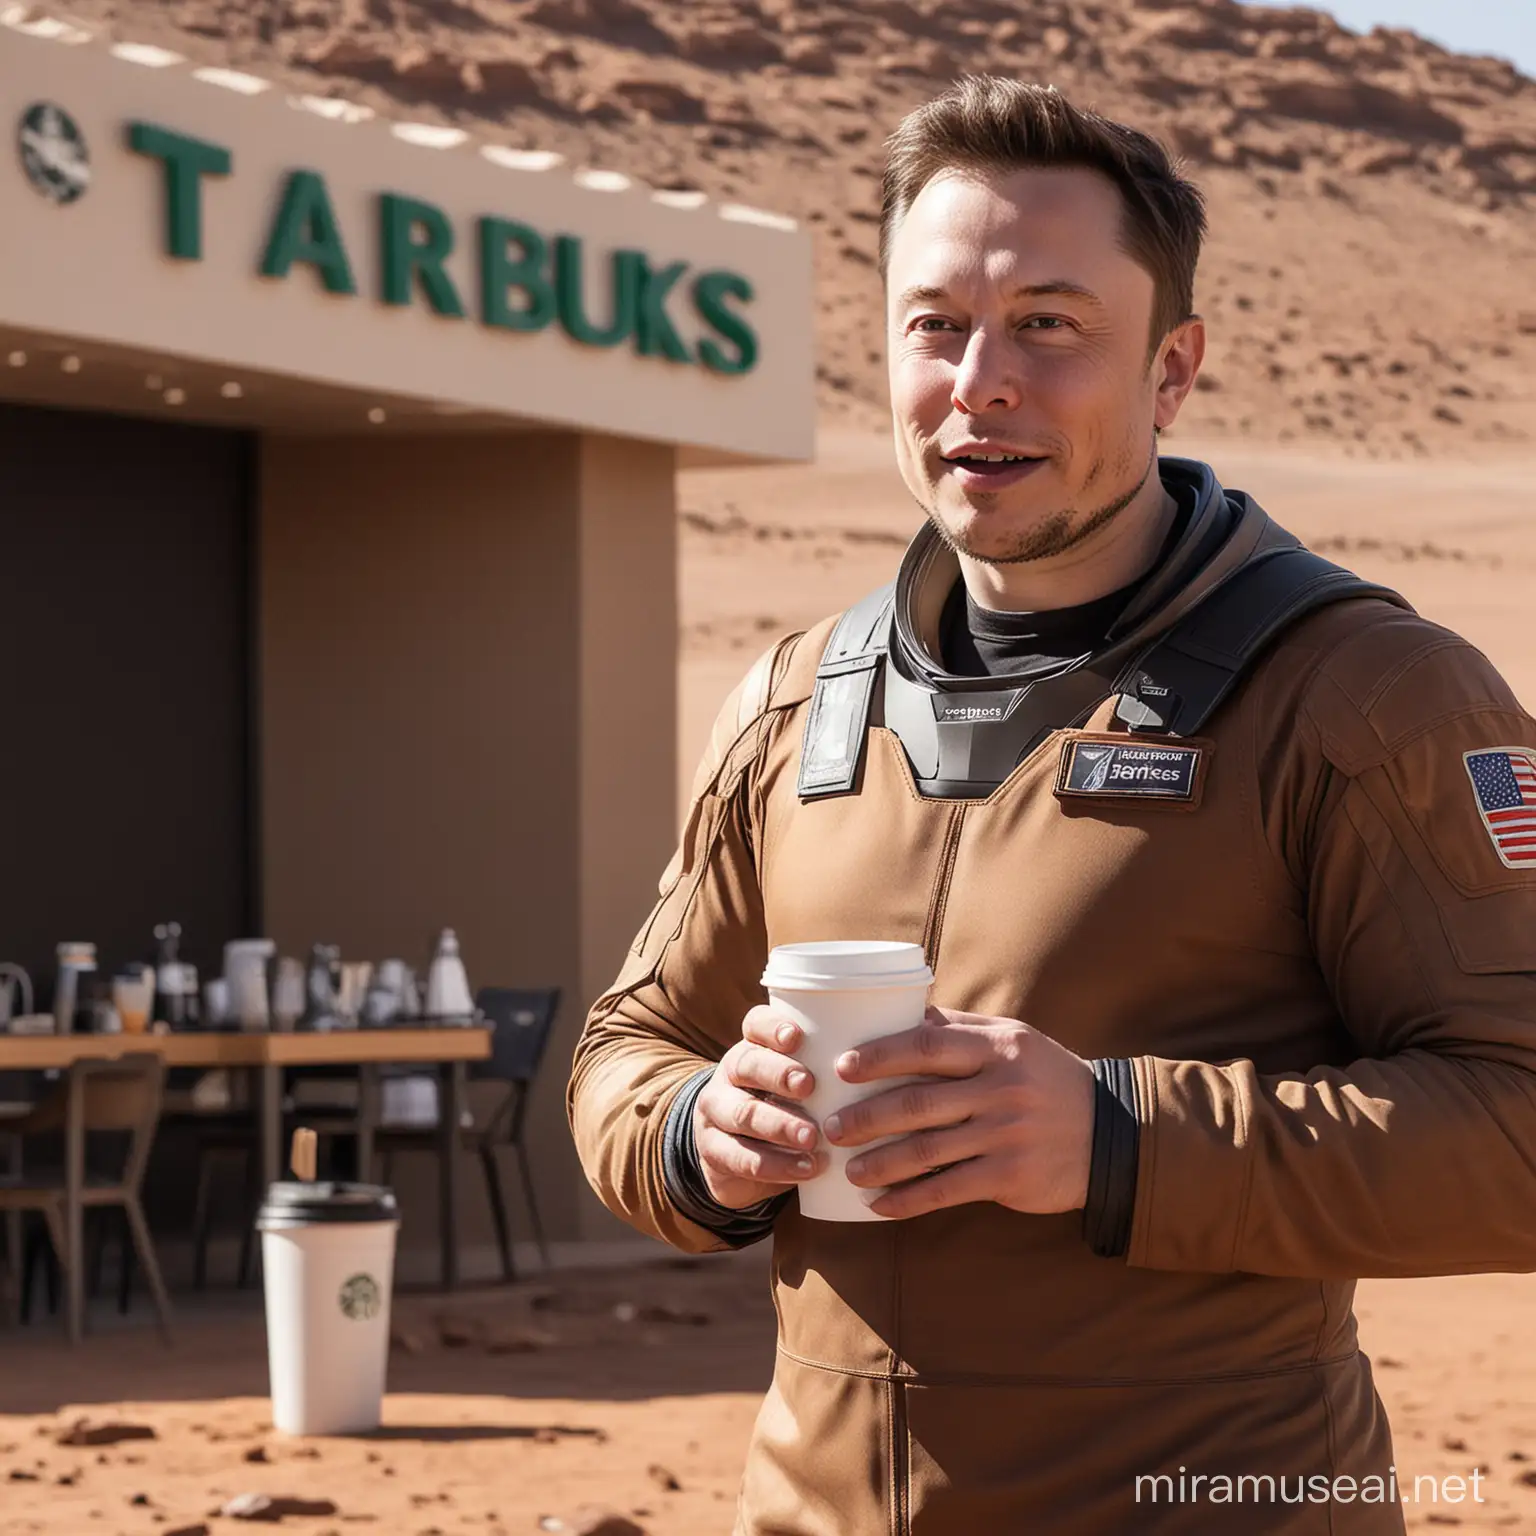 Entrepreneur Savors Coffee on the Red Planet near the Pioneering Martian Starbucks